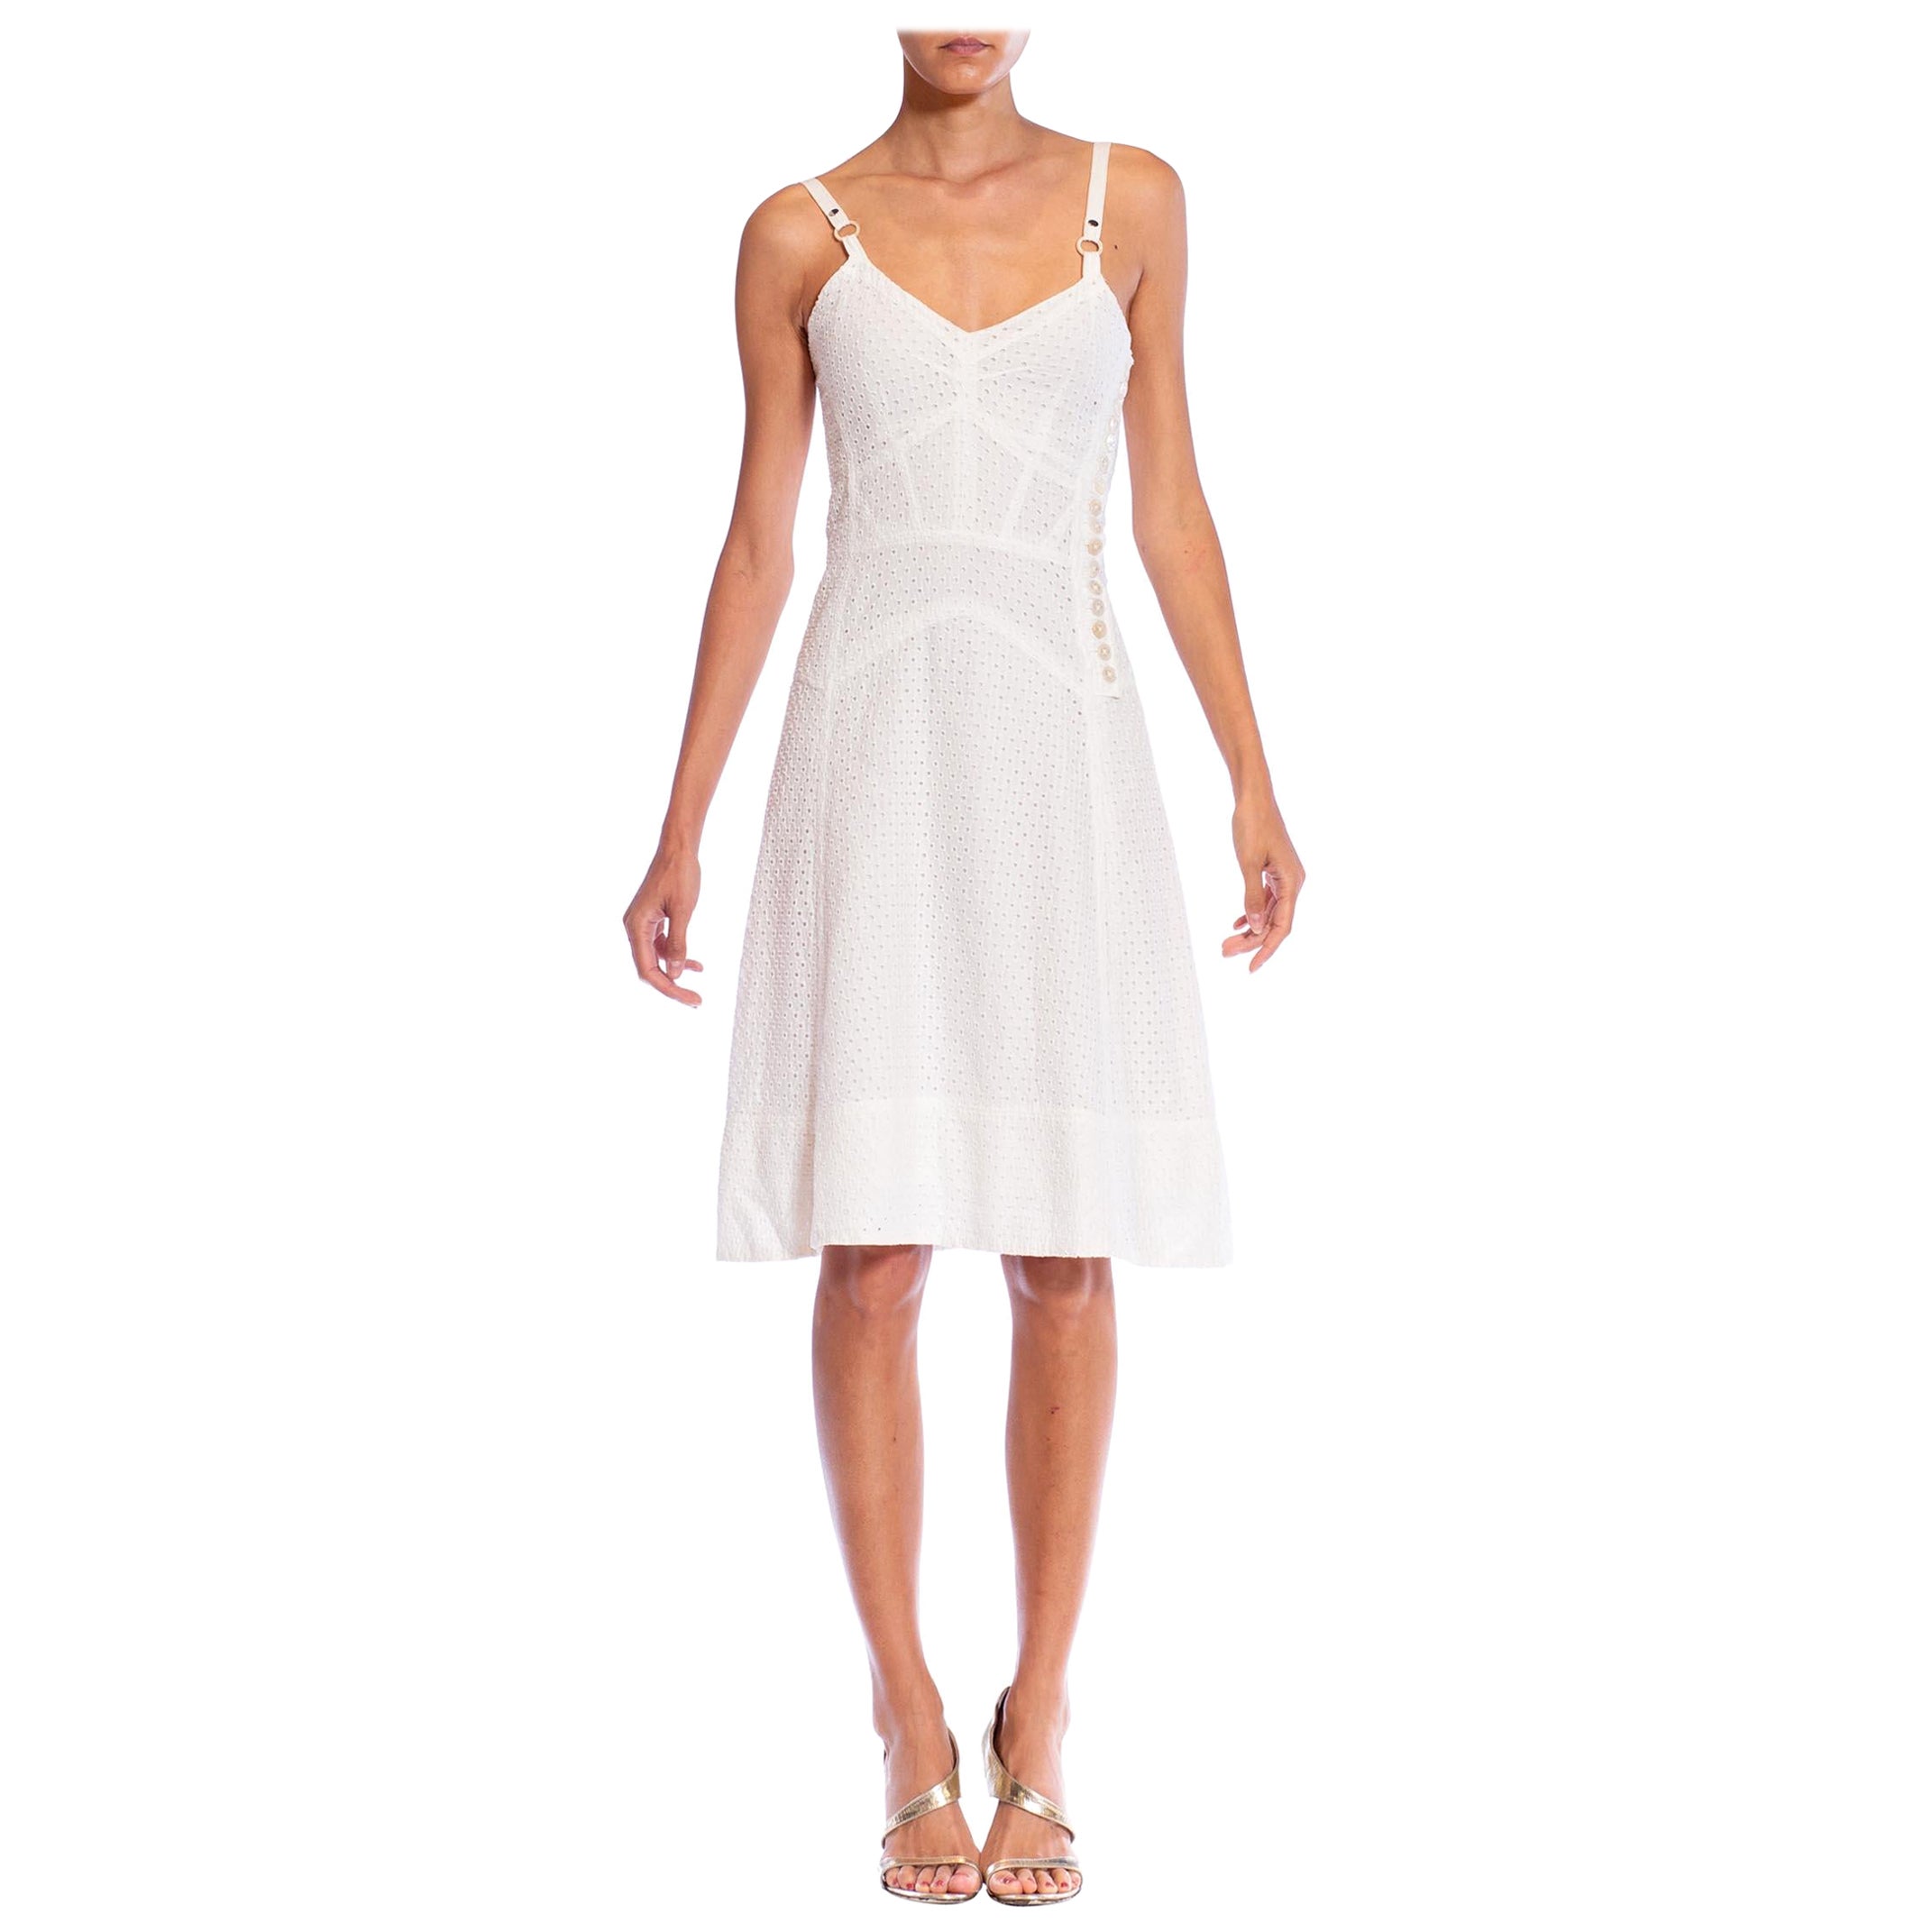 2000S MARC JACOBS White Cotton Eyelet Lace Summer Dress For Sale